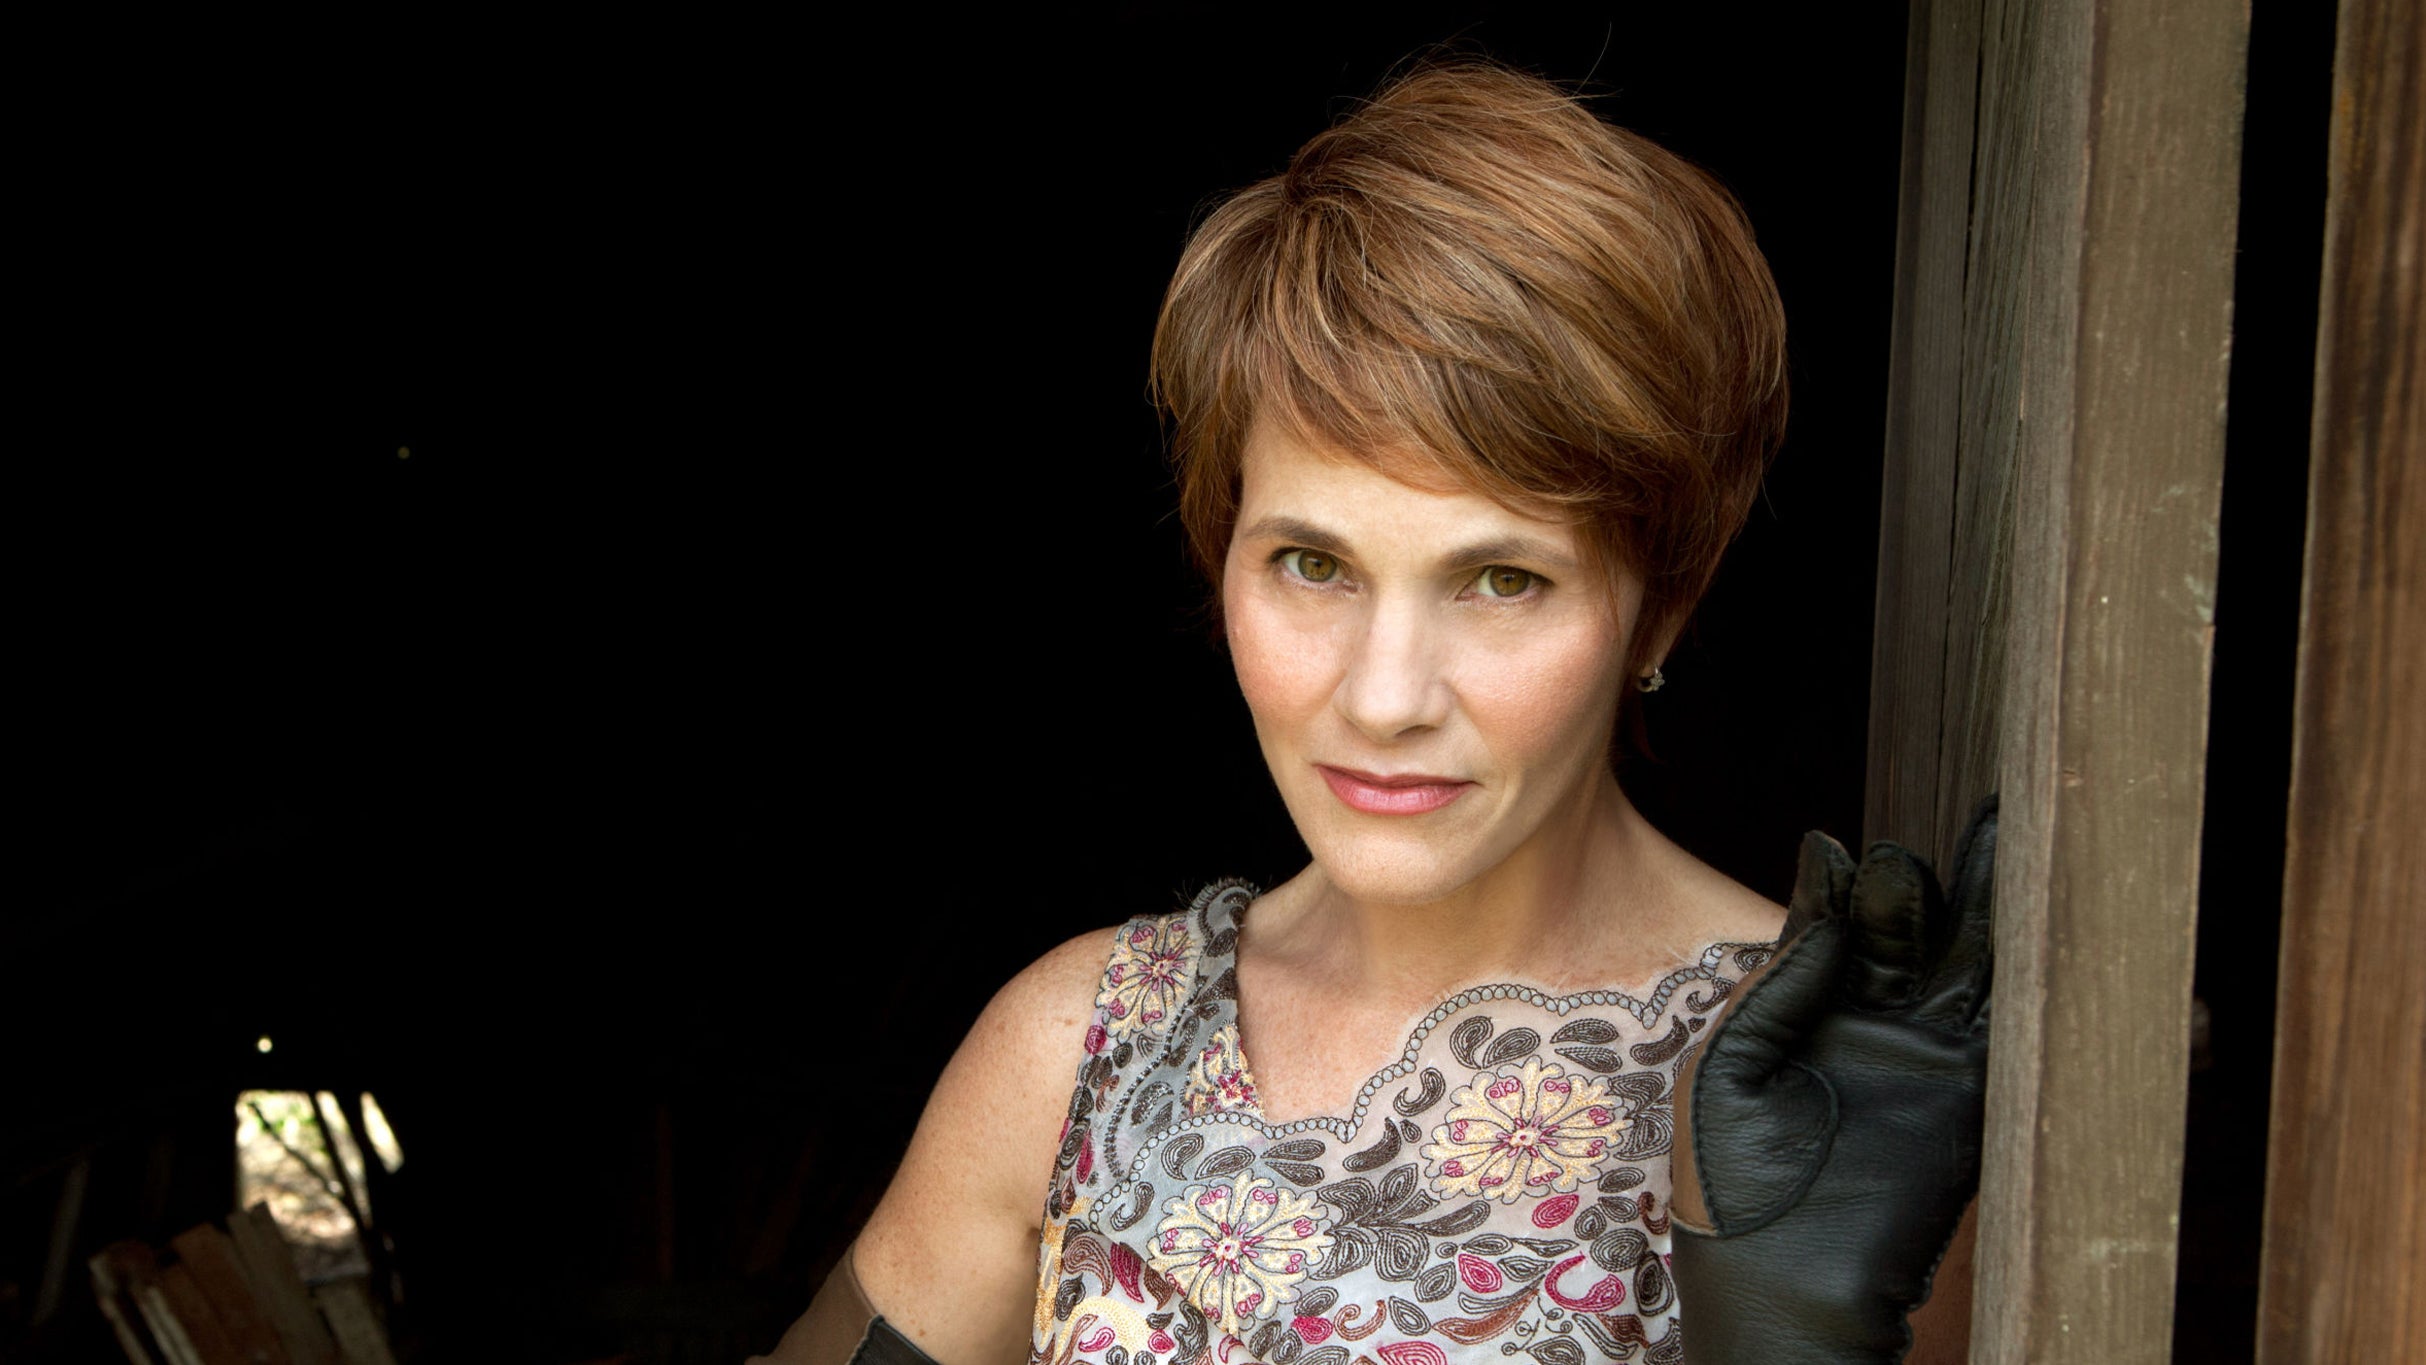 Shawn Colvin w/ KT Tunstall at Academy of Music Theatre - MA